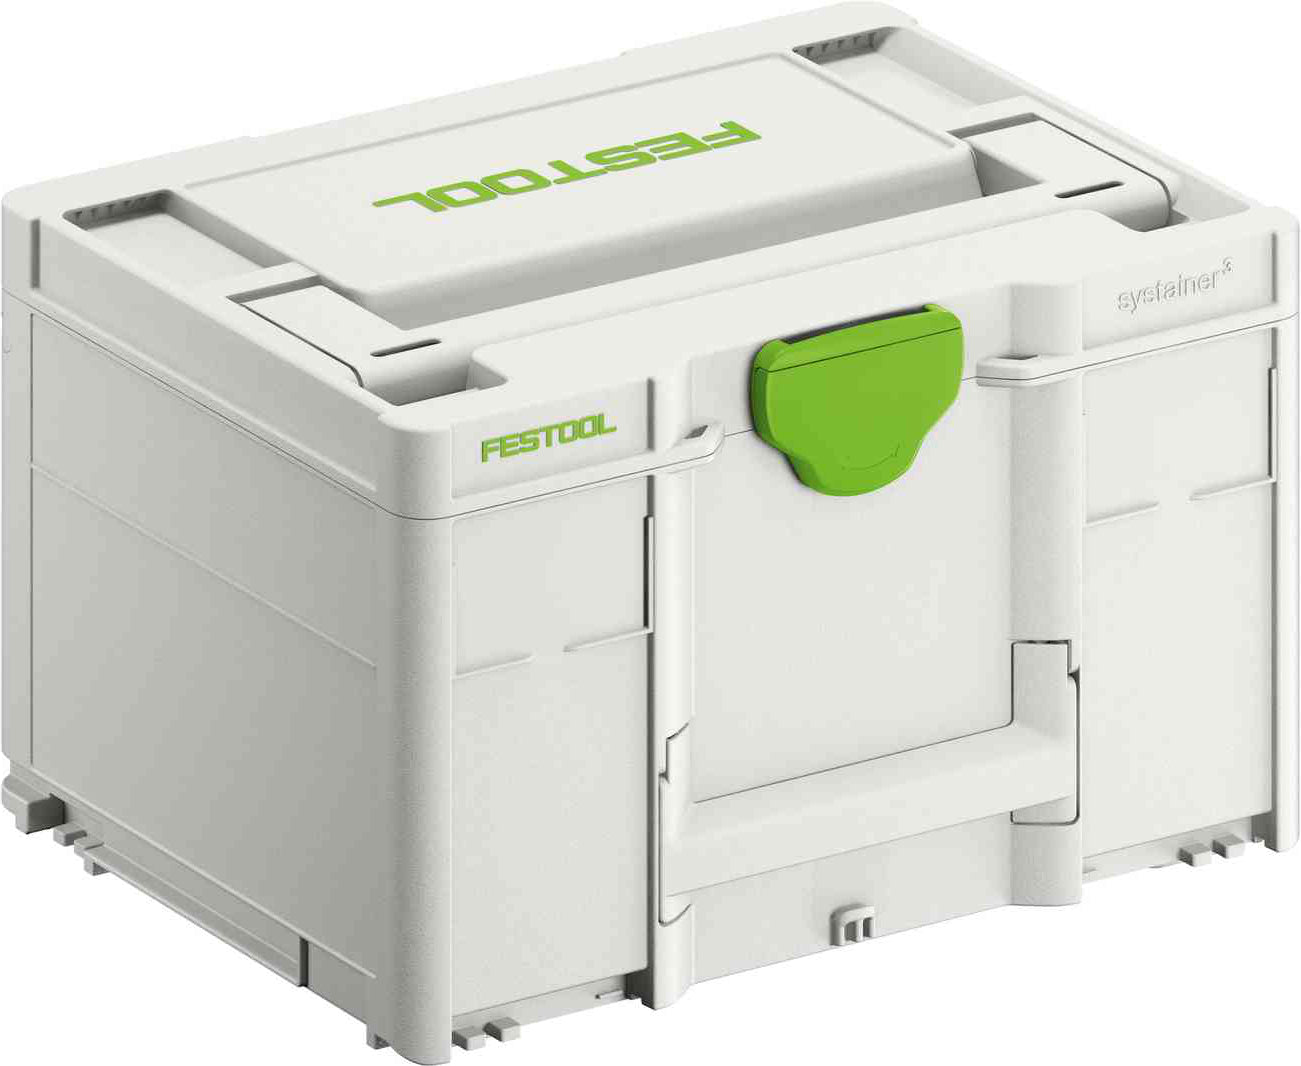 Festool Sys3 Systainer Boxes M Size 20484*